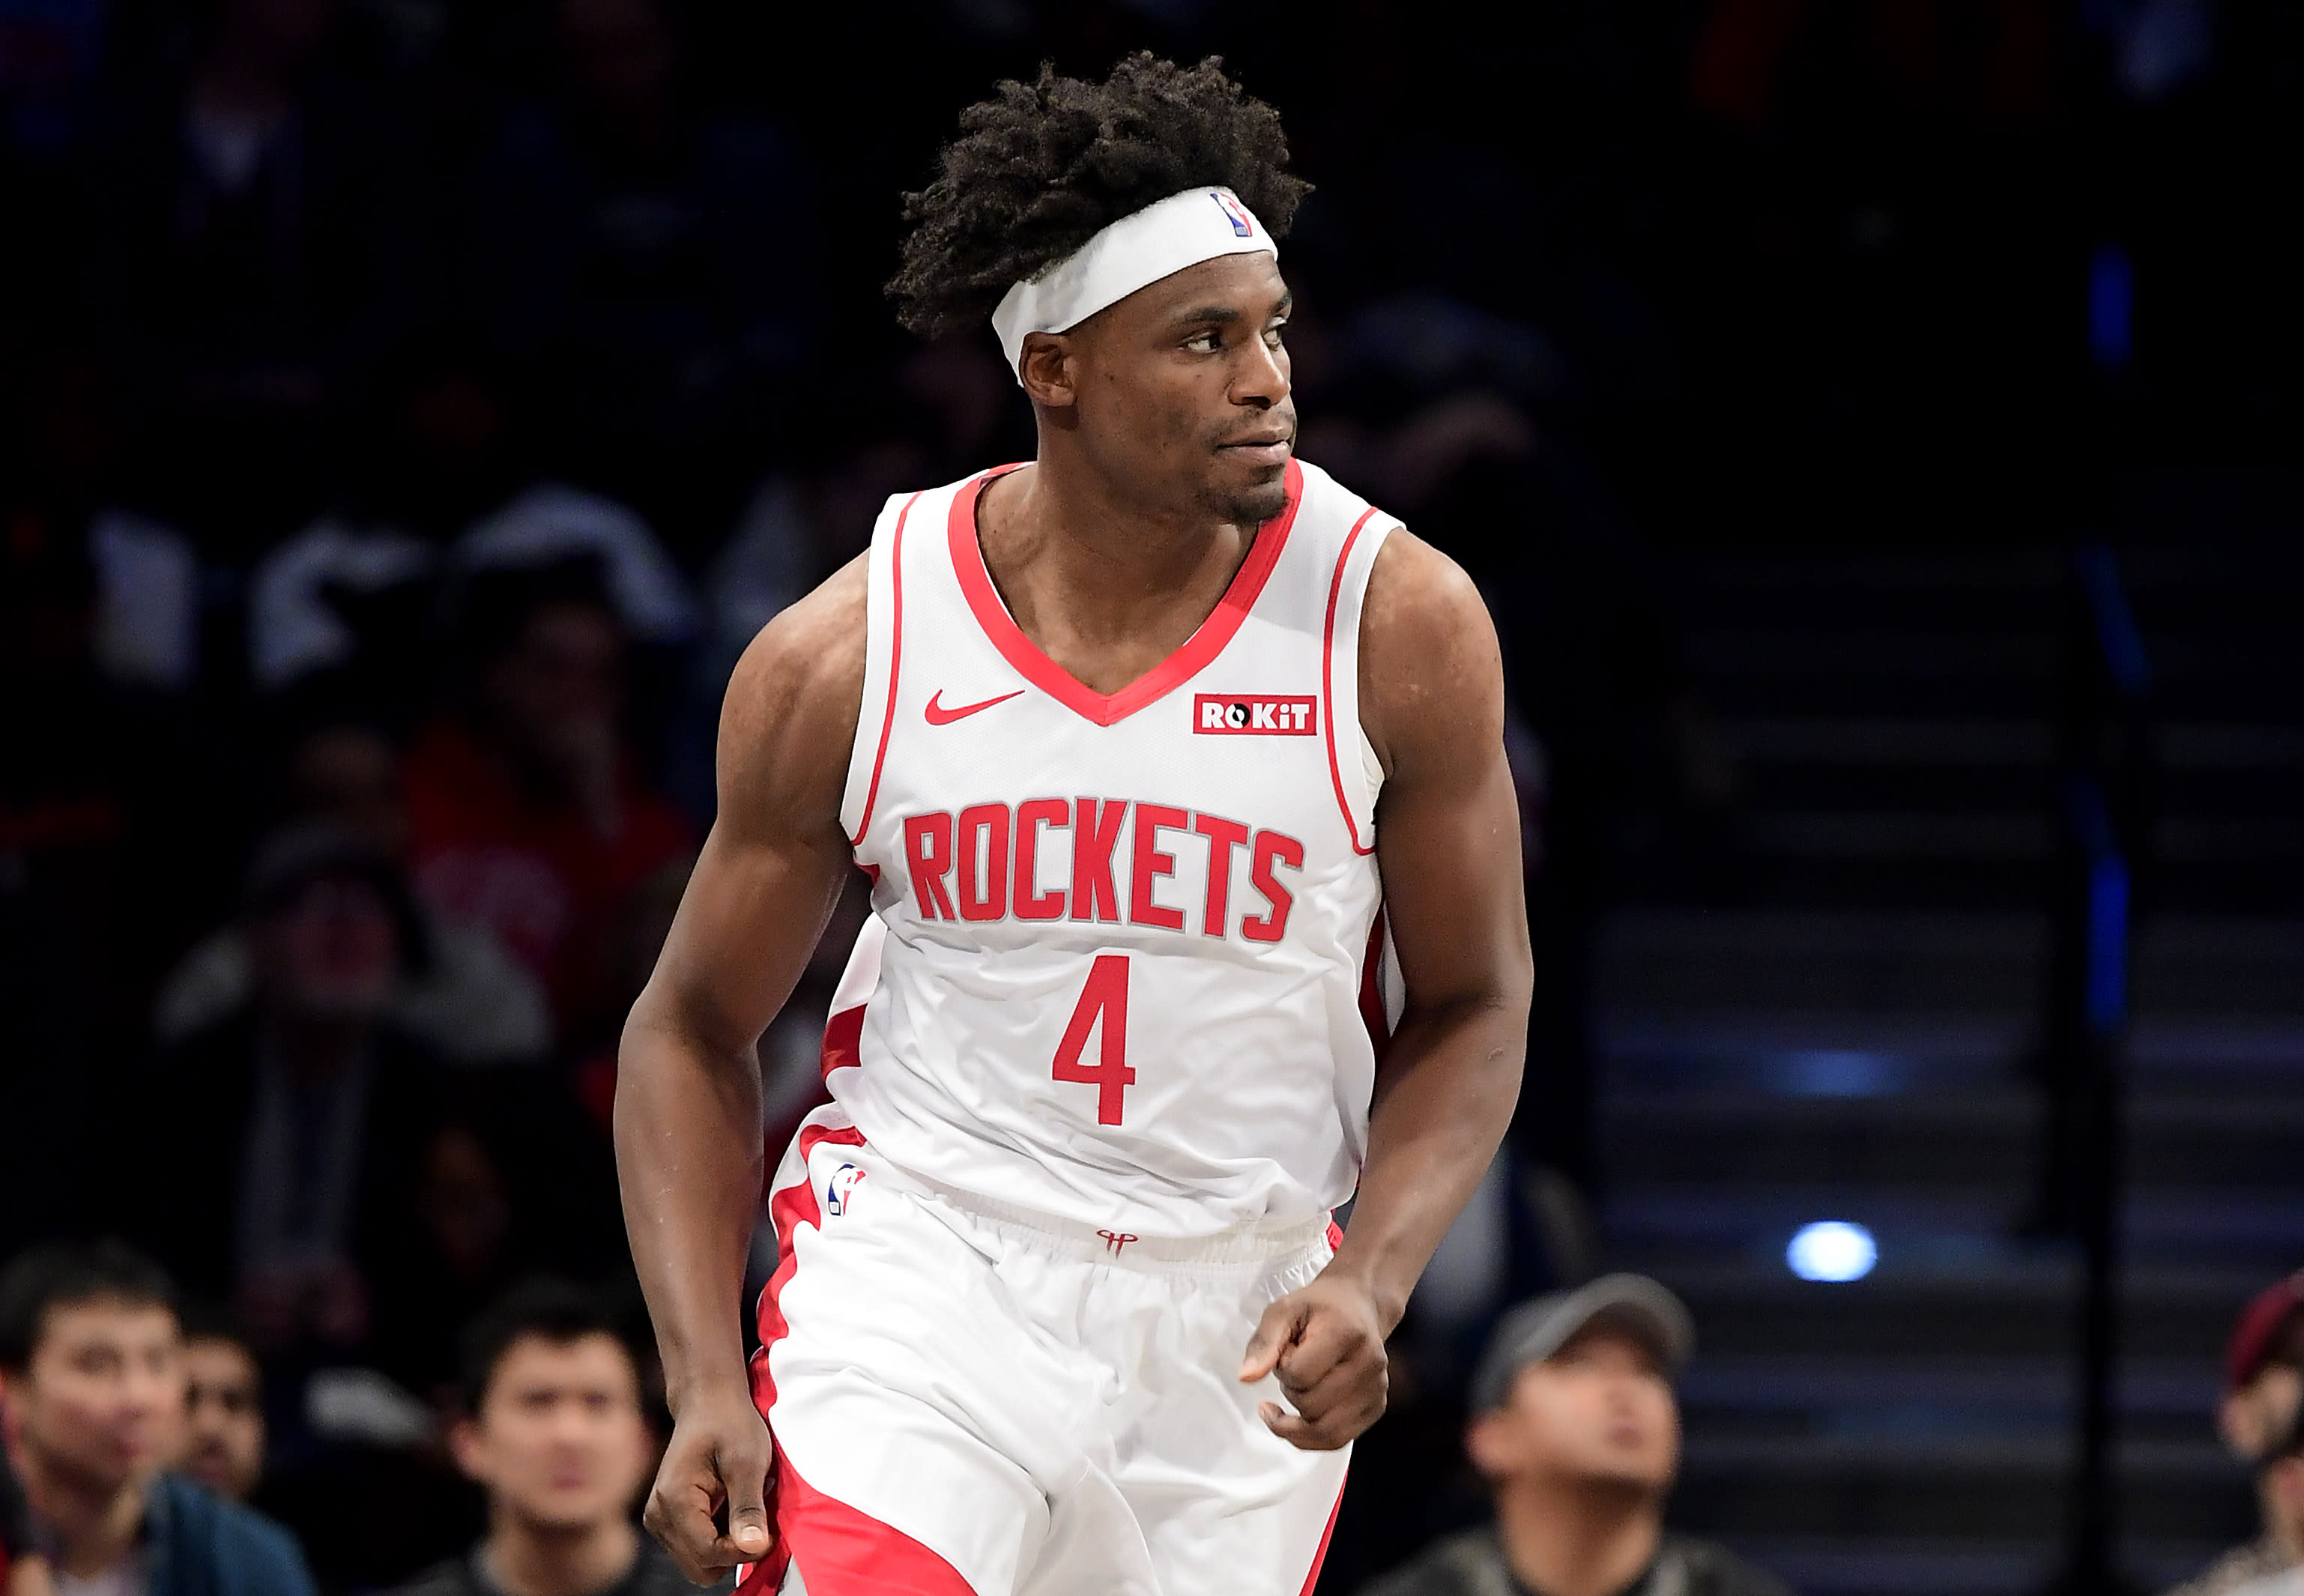 2019 Yahoo Fantasy Basketball Waiver Wire Pickups: Danuel House a must-add